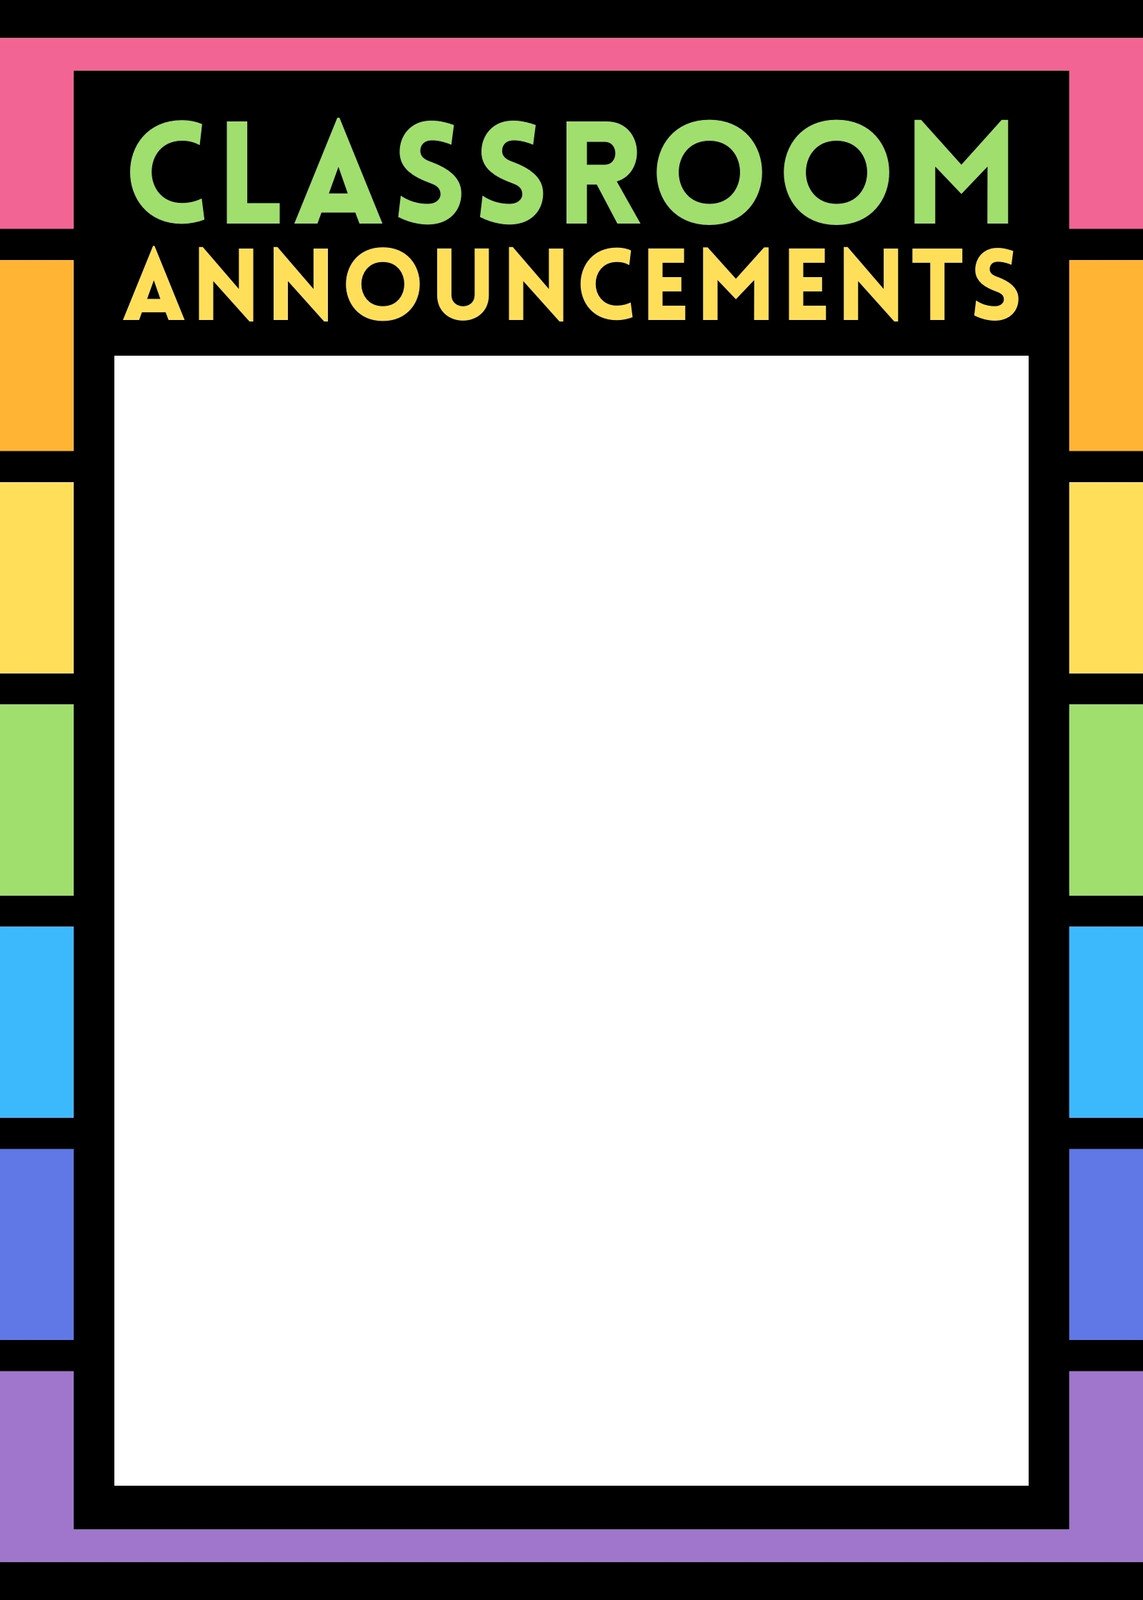 Classroom Announcements Poster in Colorful Bold Style